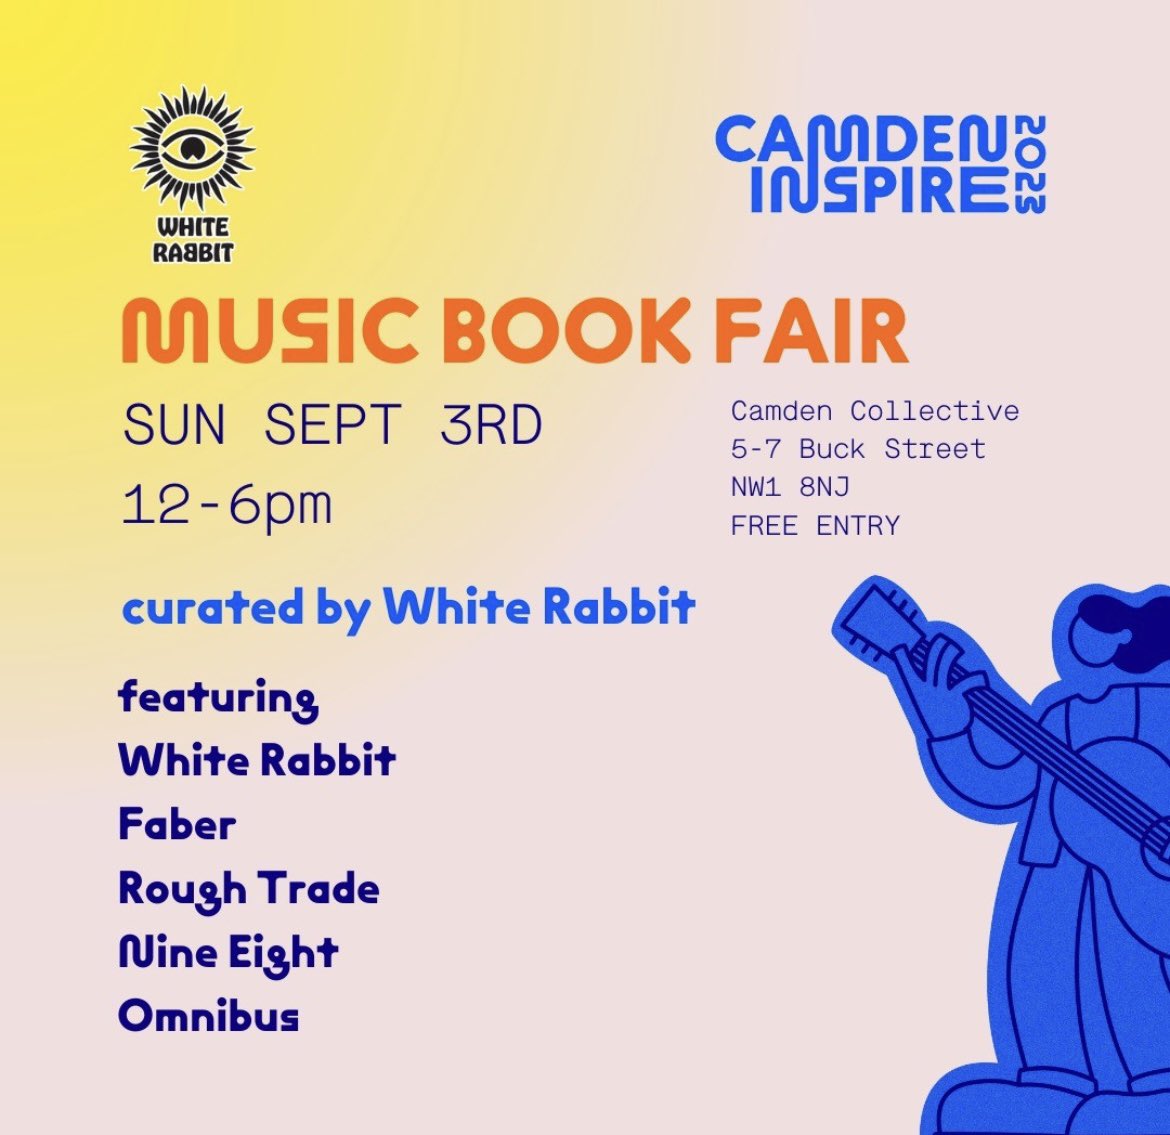 Really pleased to finally announce @CamdenInspire’s first ever music book fair curated by @WhiteRabbitBks, including @FaberBooks, @RoughTradeBooks, @nineeightbooks & @OmnibusPress taking place 3 September. Books sold by the brilliant @realmagicbooks ✨ #musicbooks